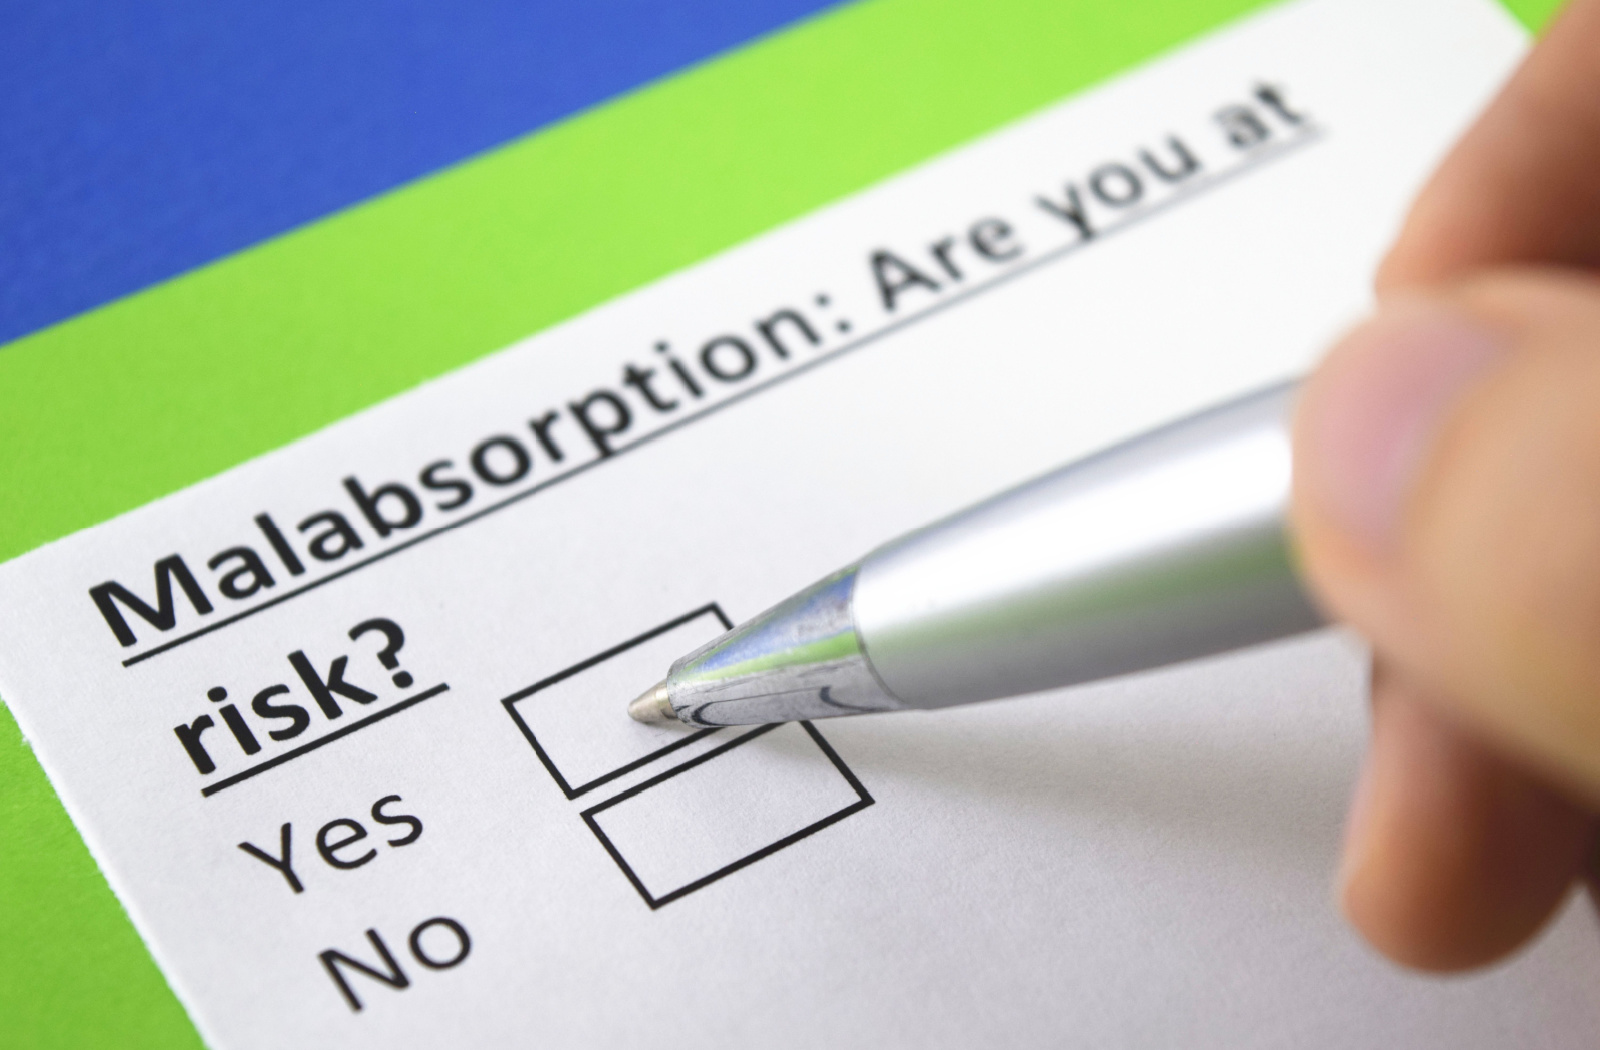 A close-up of someone using a pen to check a box labelled yes on a form asking if the person is at-risk for malabsorption, which can lead to anemia.